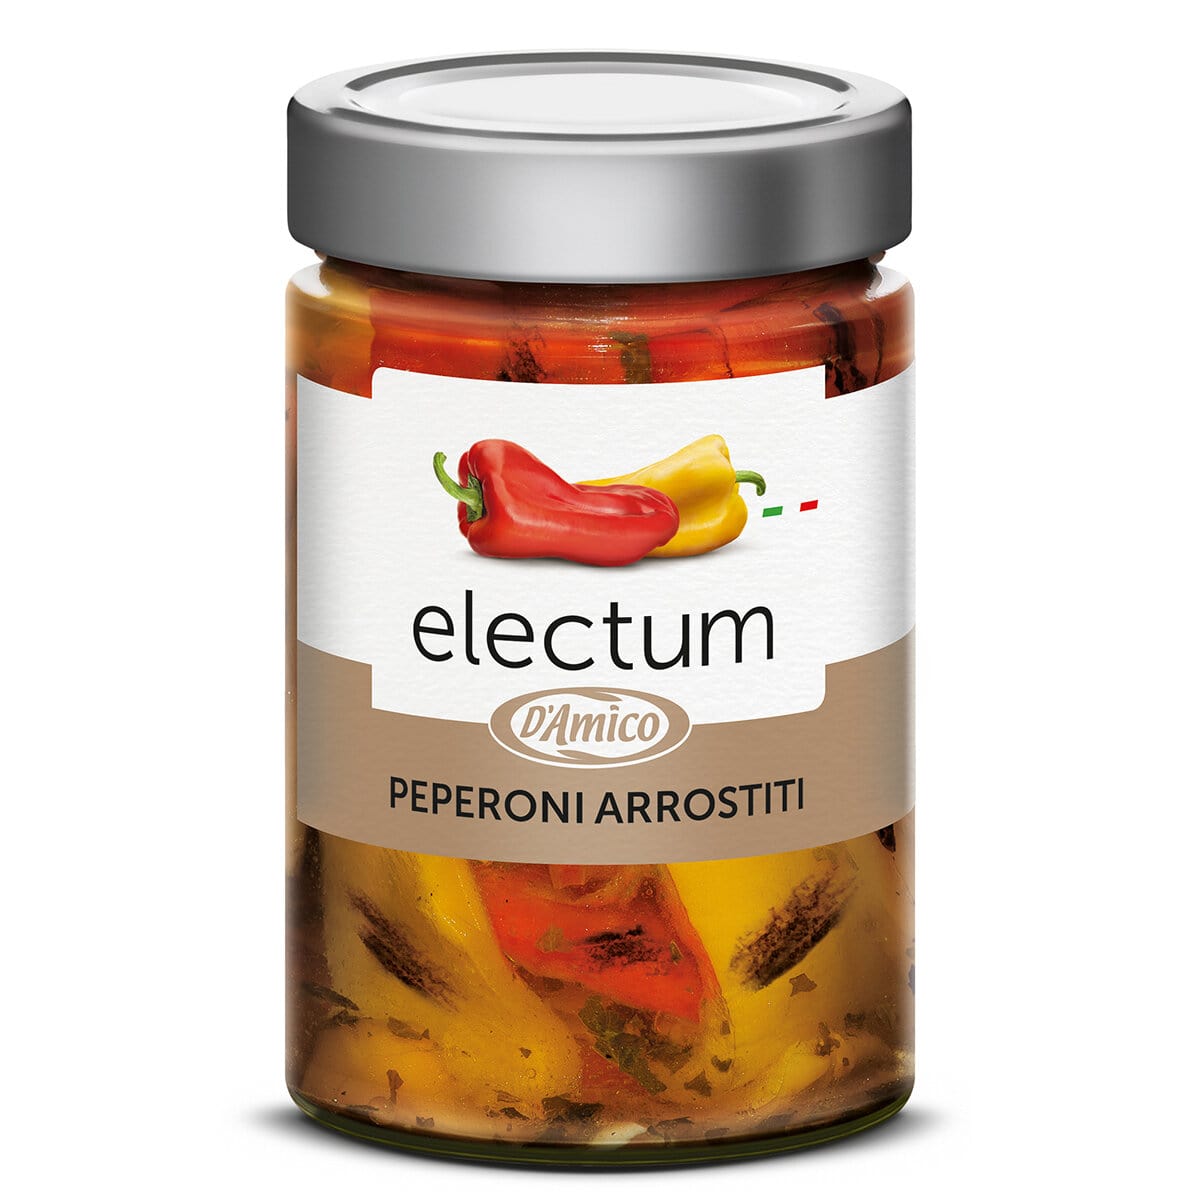 D'Amico Electum Chargrilled Peppers